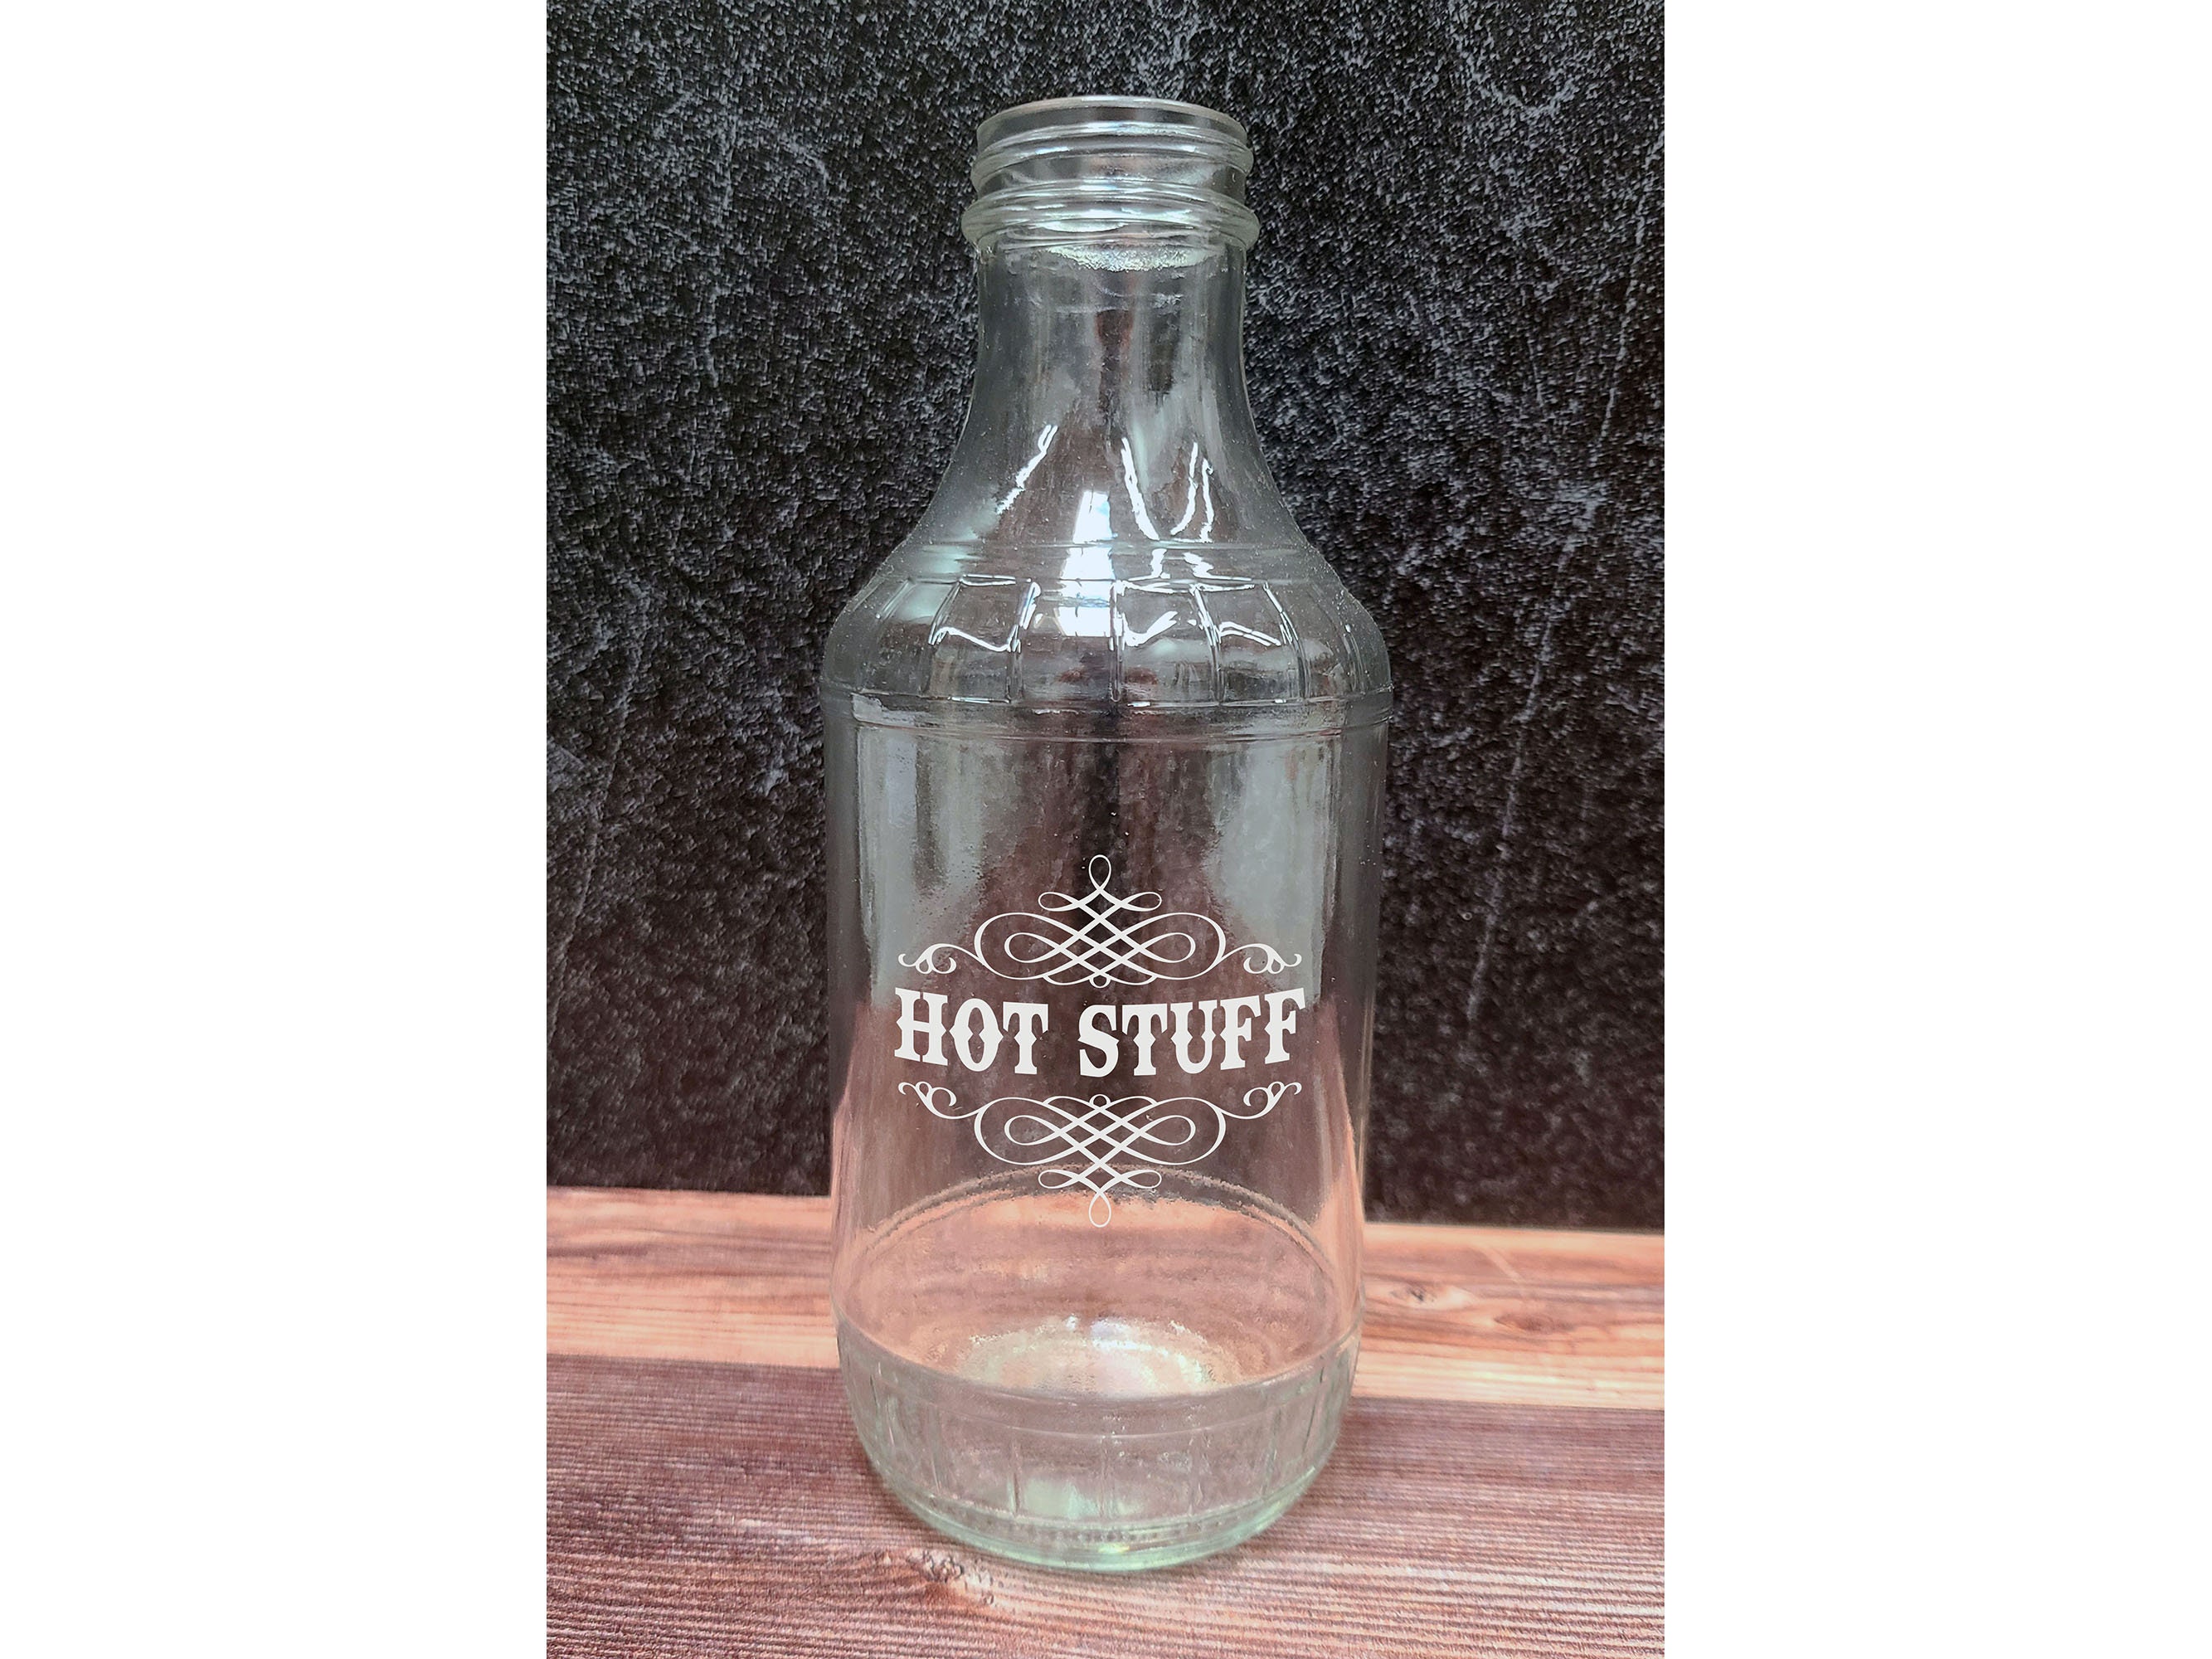 12 oz Clear Glass Barbeque Sauce Bottles w/ Gold Metal Lug Caps